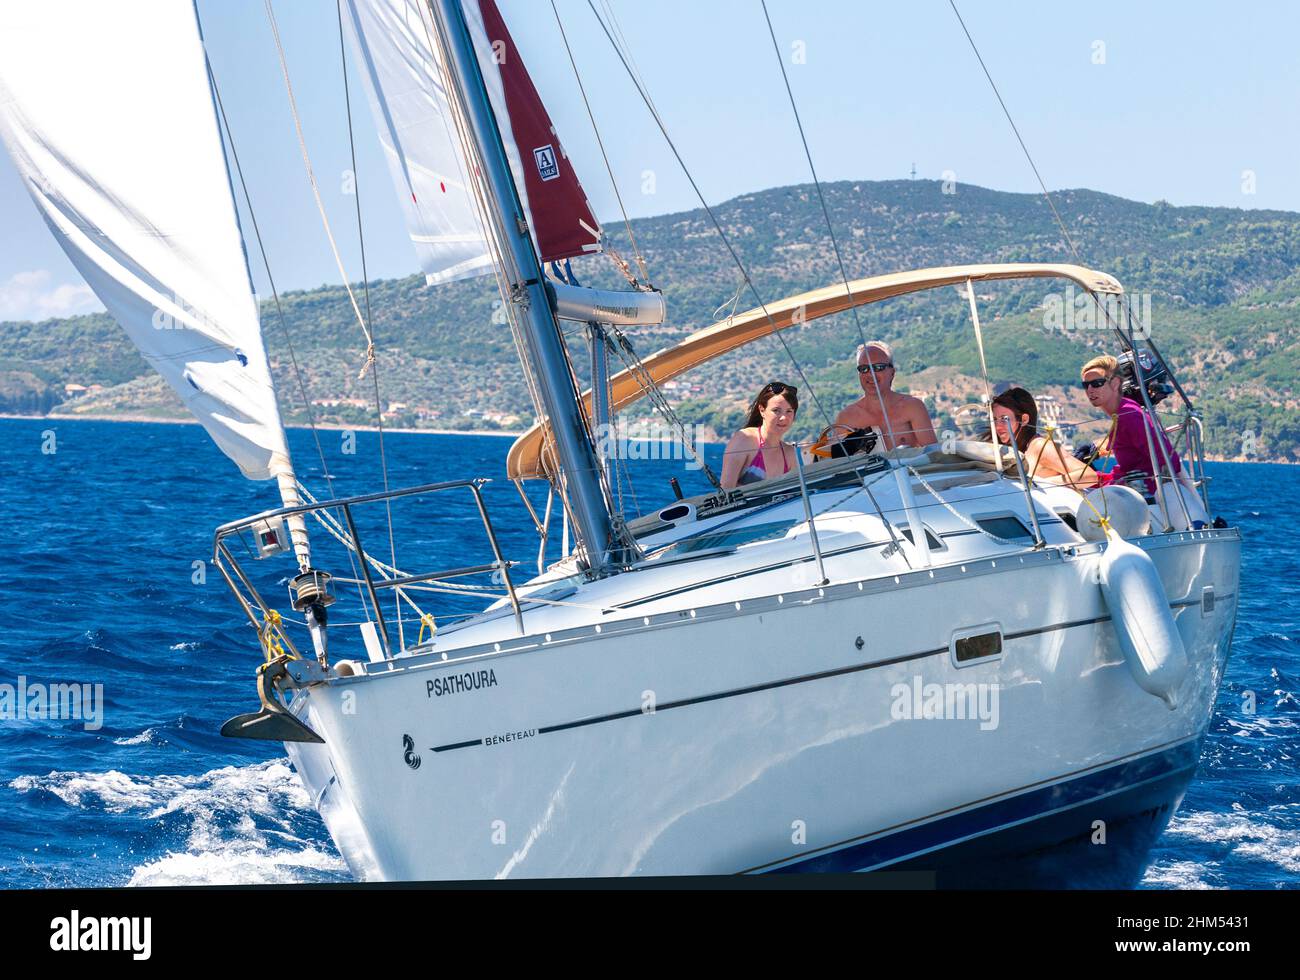 Family on sailing holiday in mid-summer off the Greek island of Alonnisos in the Aegean sea, Greece, Europe Stock Photo